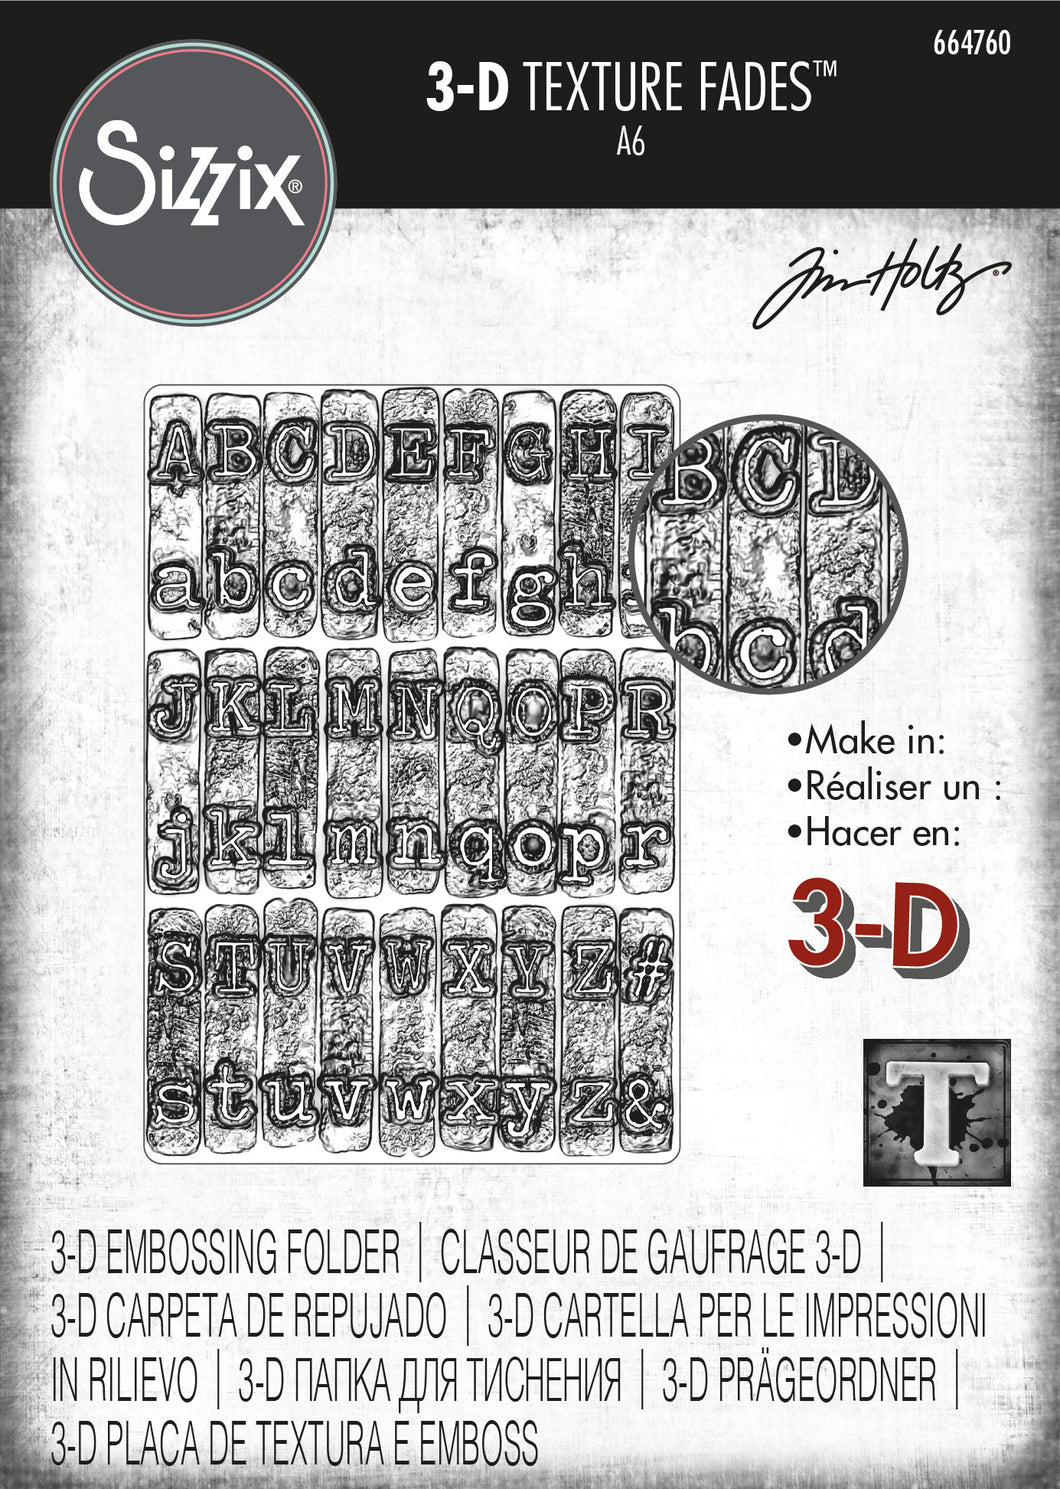 Sizzix 3-D Texture Fades Embossing Folder - Typewriter by Tim Holtz (664760)